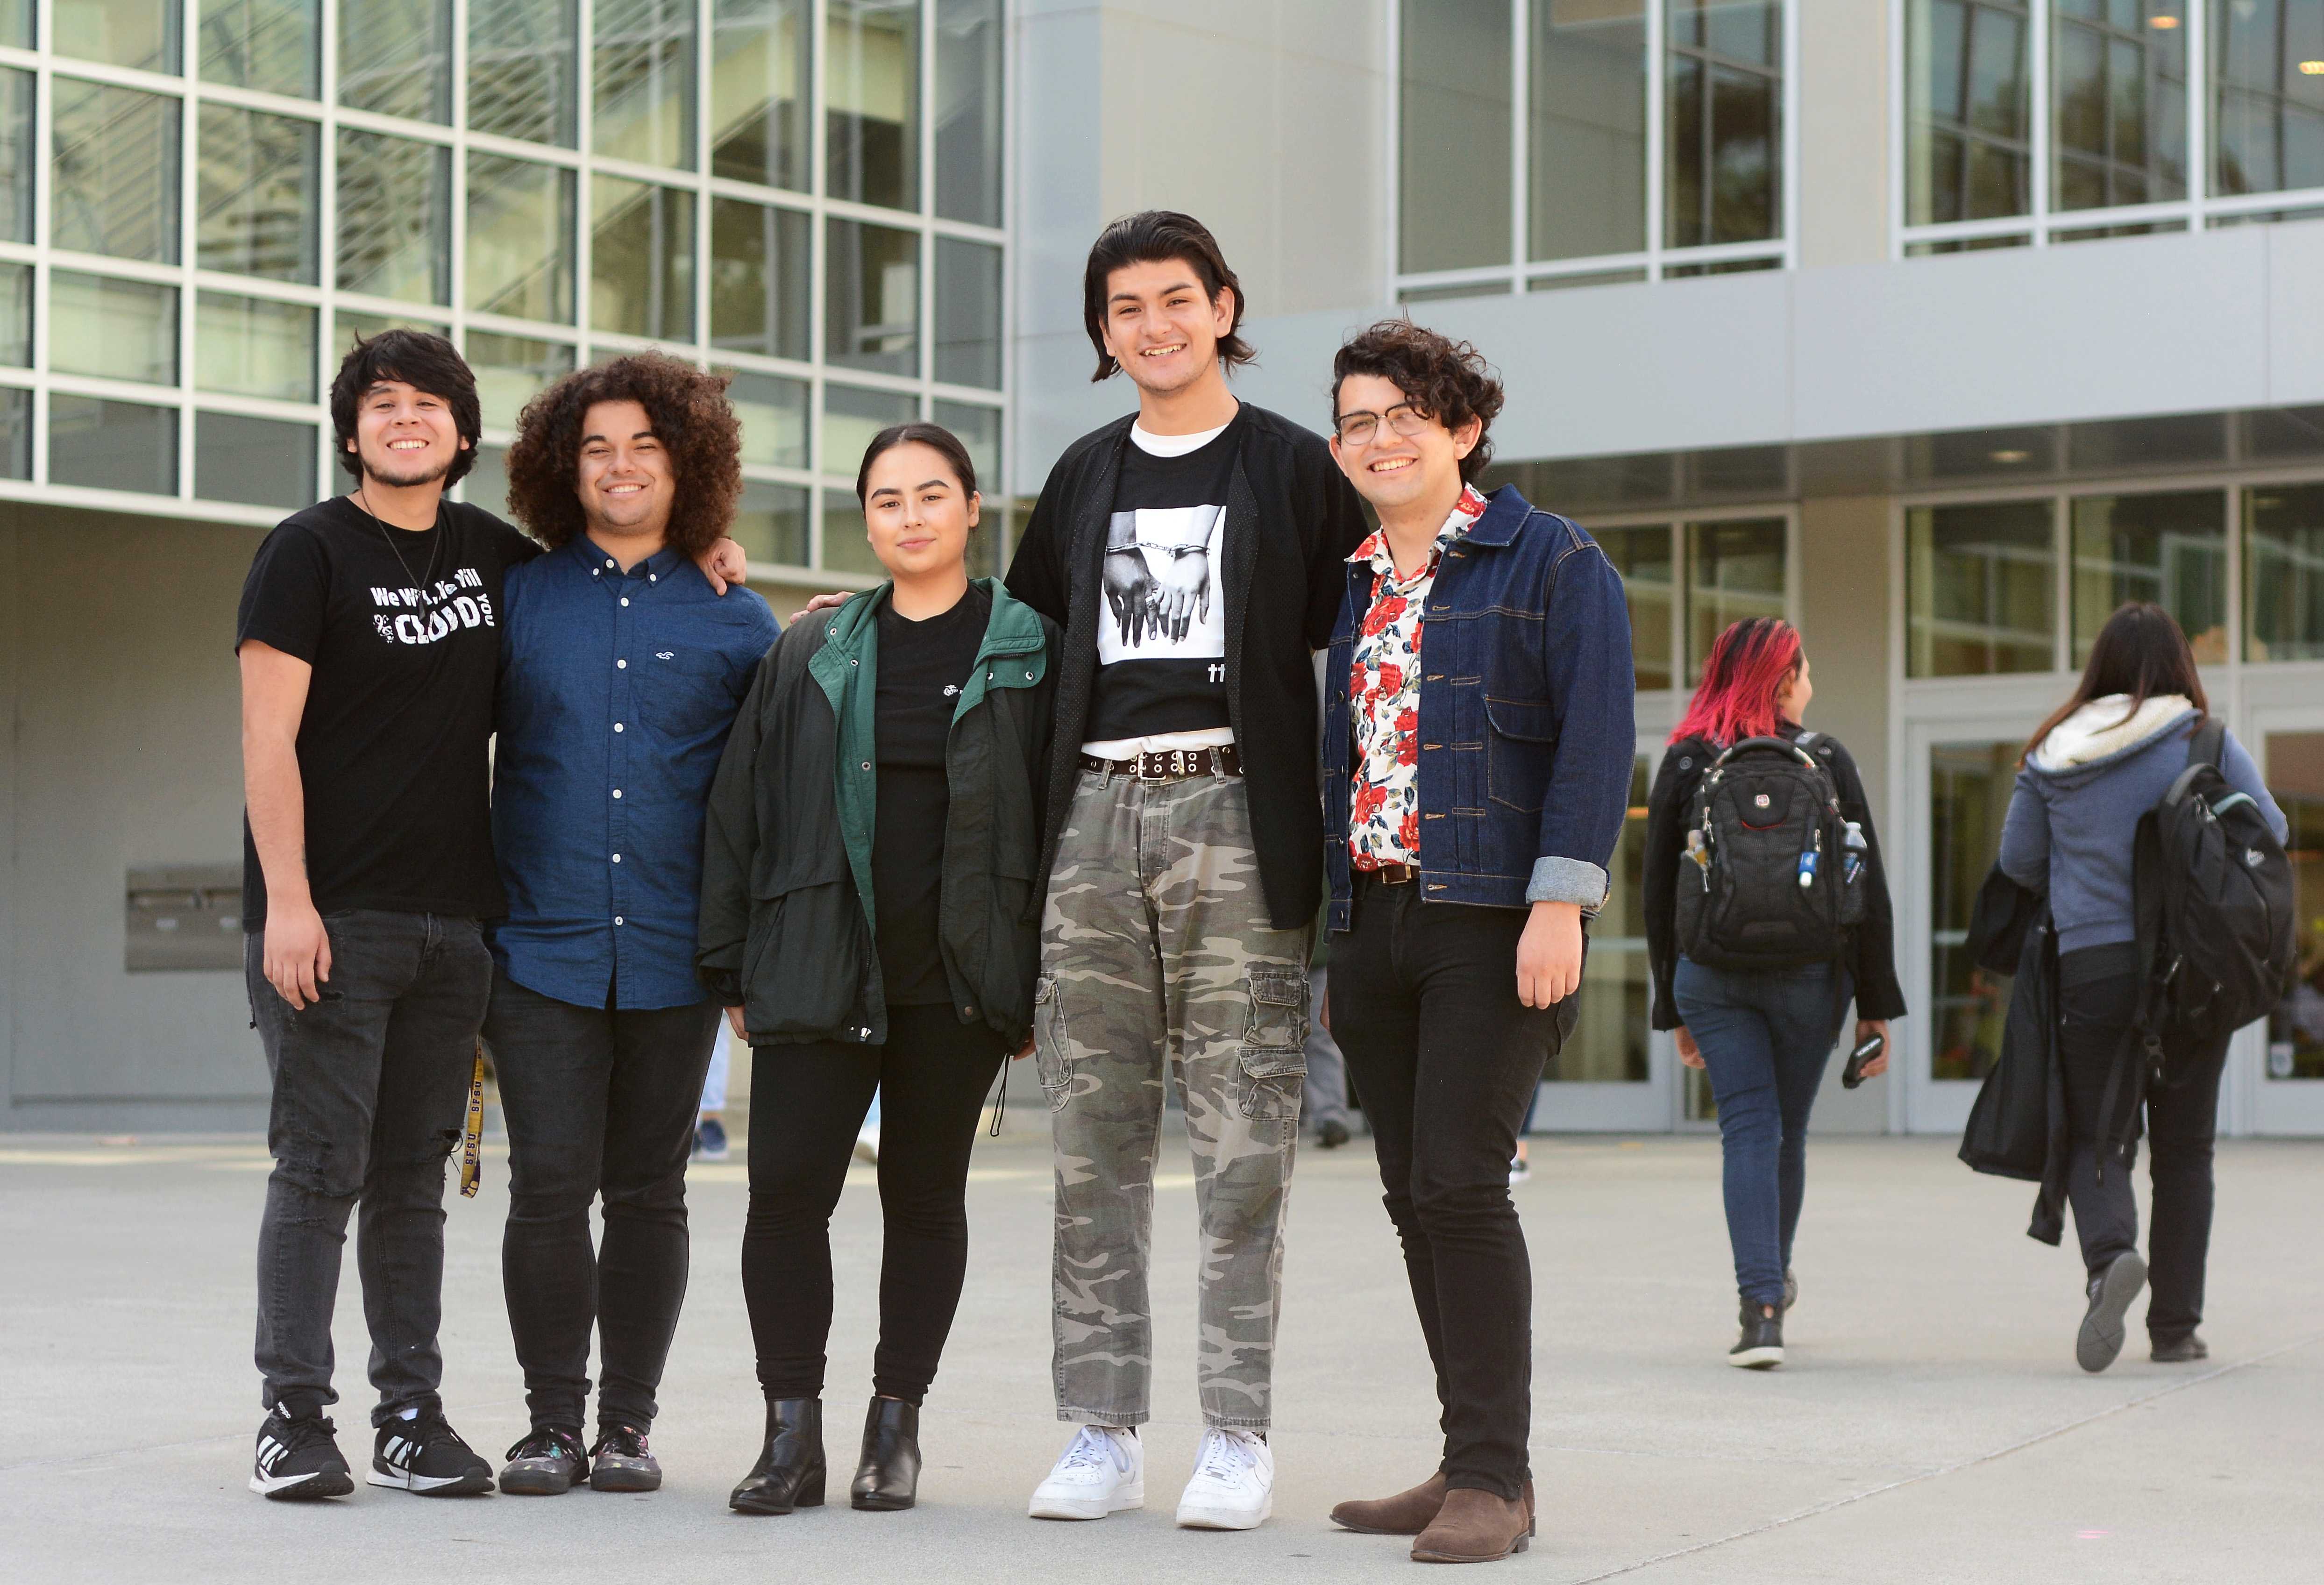 The College Democrats at SF State officers pose for a photograph at the J. Paul Leonard library at SF State in San Francisco, Calif., on Wednesday, Oct. 3, 2018. (Aaron Levy-Wollins/Golden Gate Xpress)